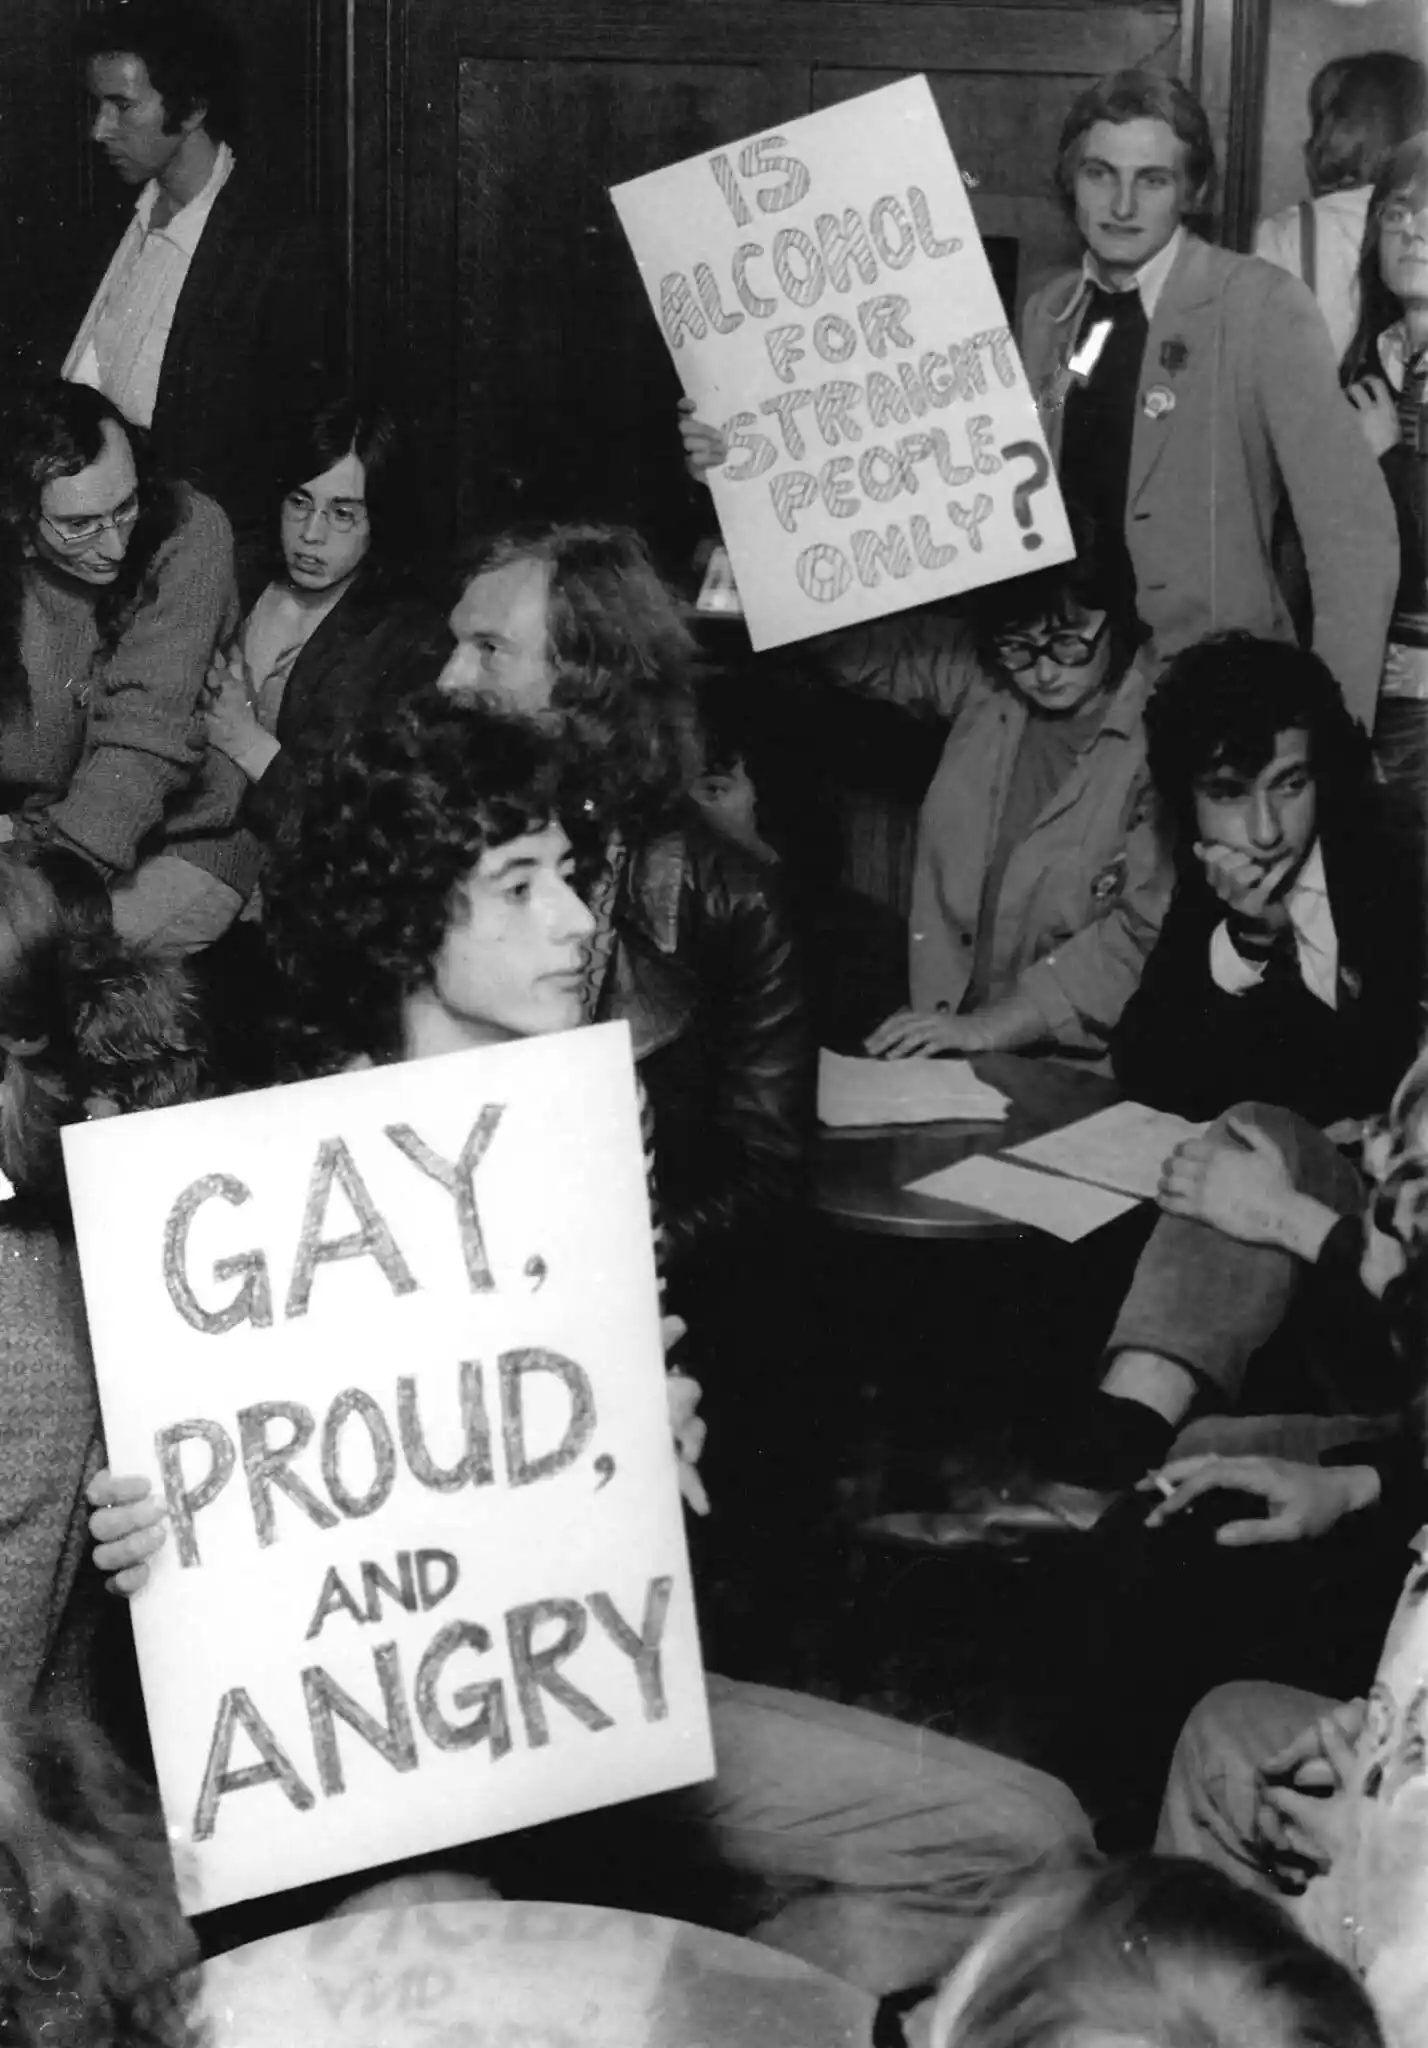 Peter Tatchell at an event with Gay Liberation Front in the 1970s. 